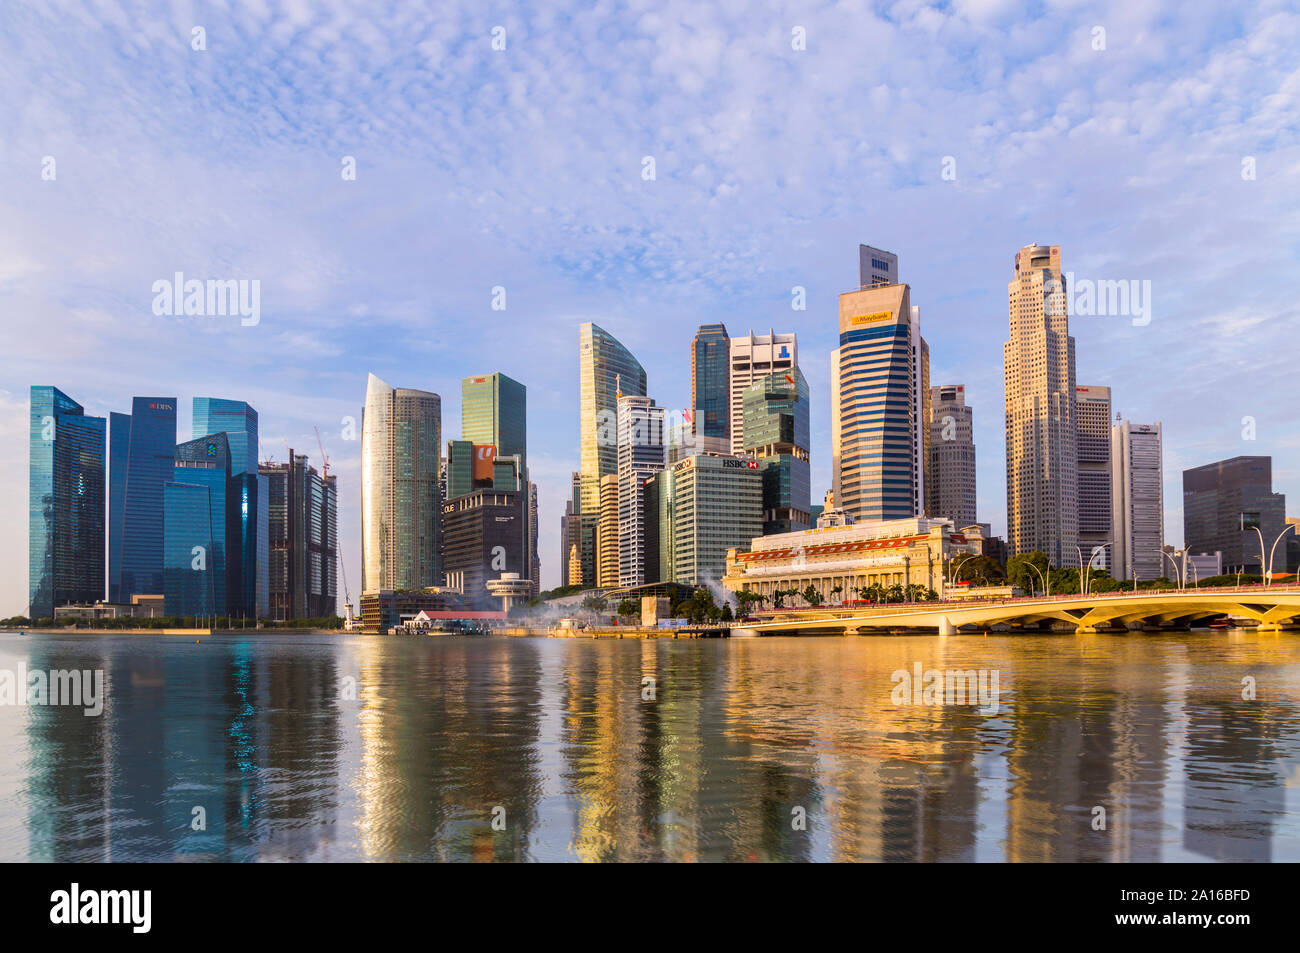 Skyline of Financial District and Marina Bay, Singapore Stock Photo